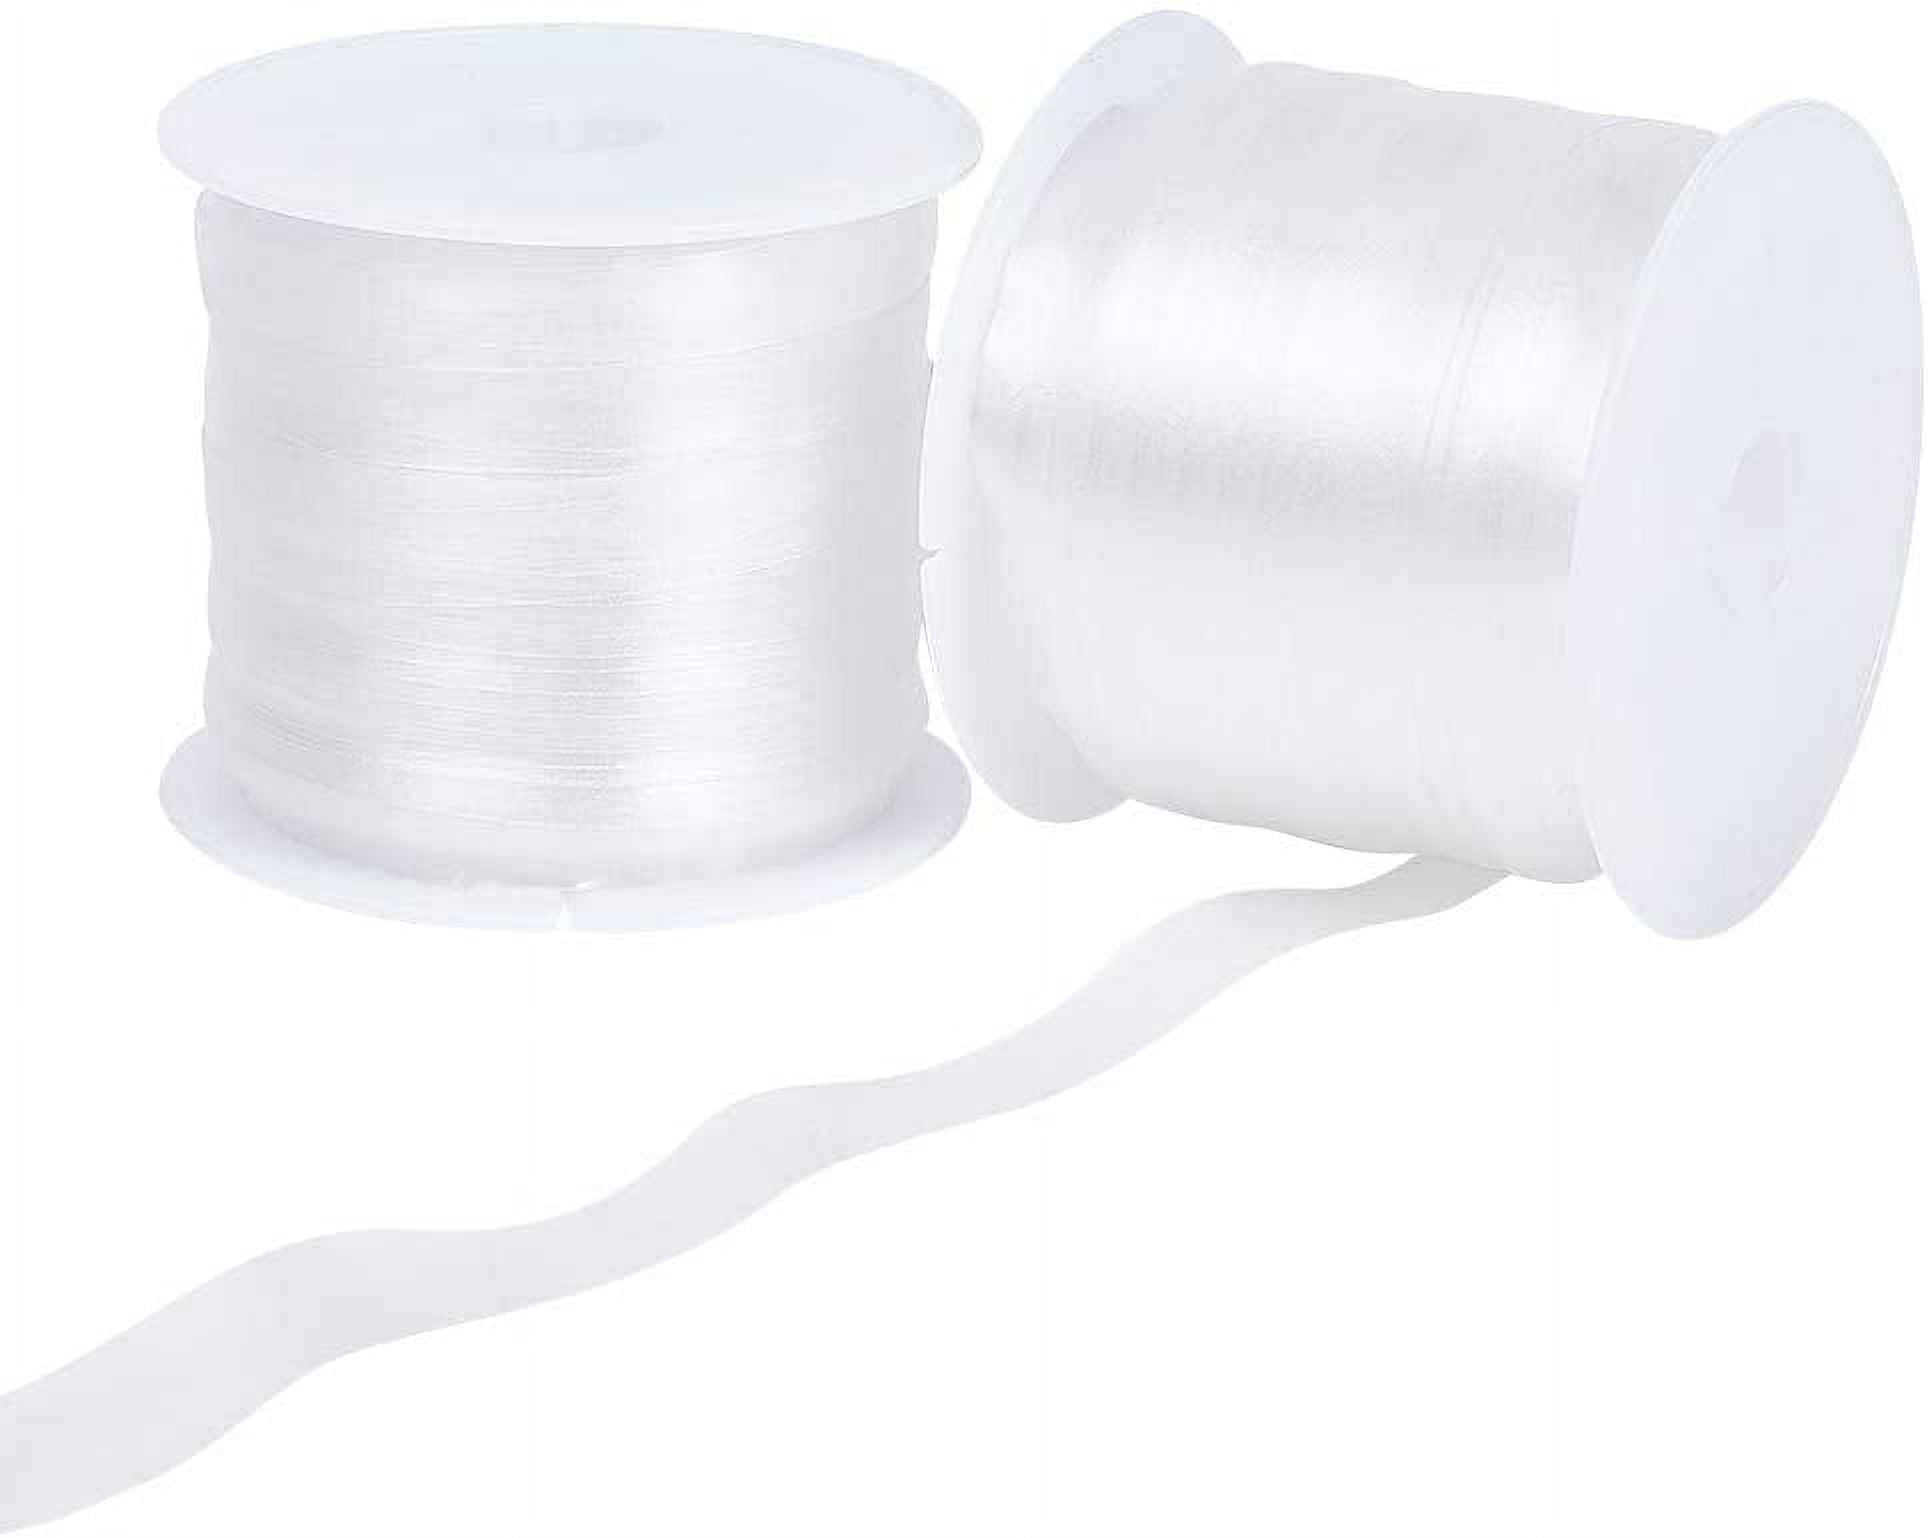 Clear Elastic Strap 2 Sizes 30m Total Plastic Stretchable Adjustable Cord for DIY Shoulder Bra Clothes Sewing Project 6mm/10mm, Adult Unisex, Size